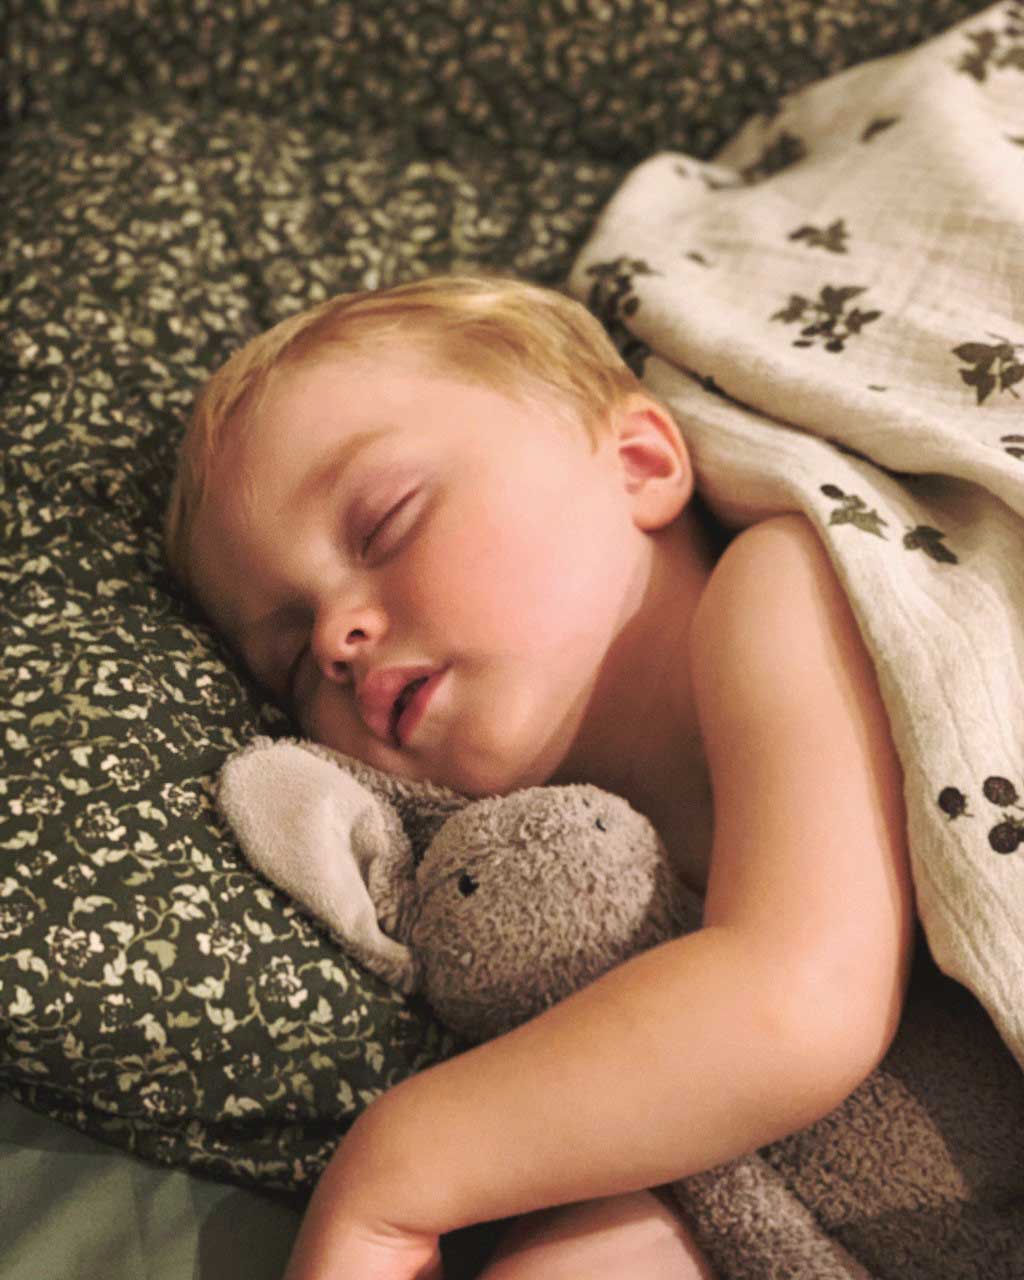 Lovisa's son Nils snuggled up with his bunny in Garbo&Friends bedding